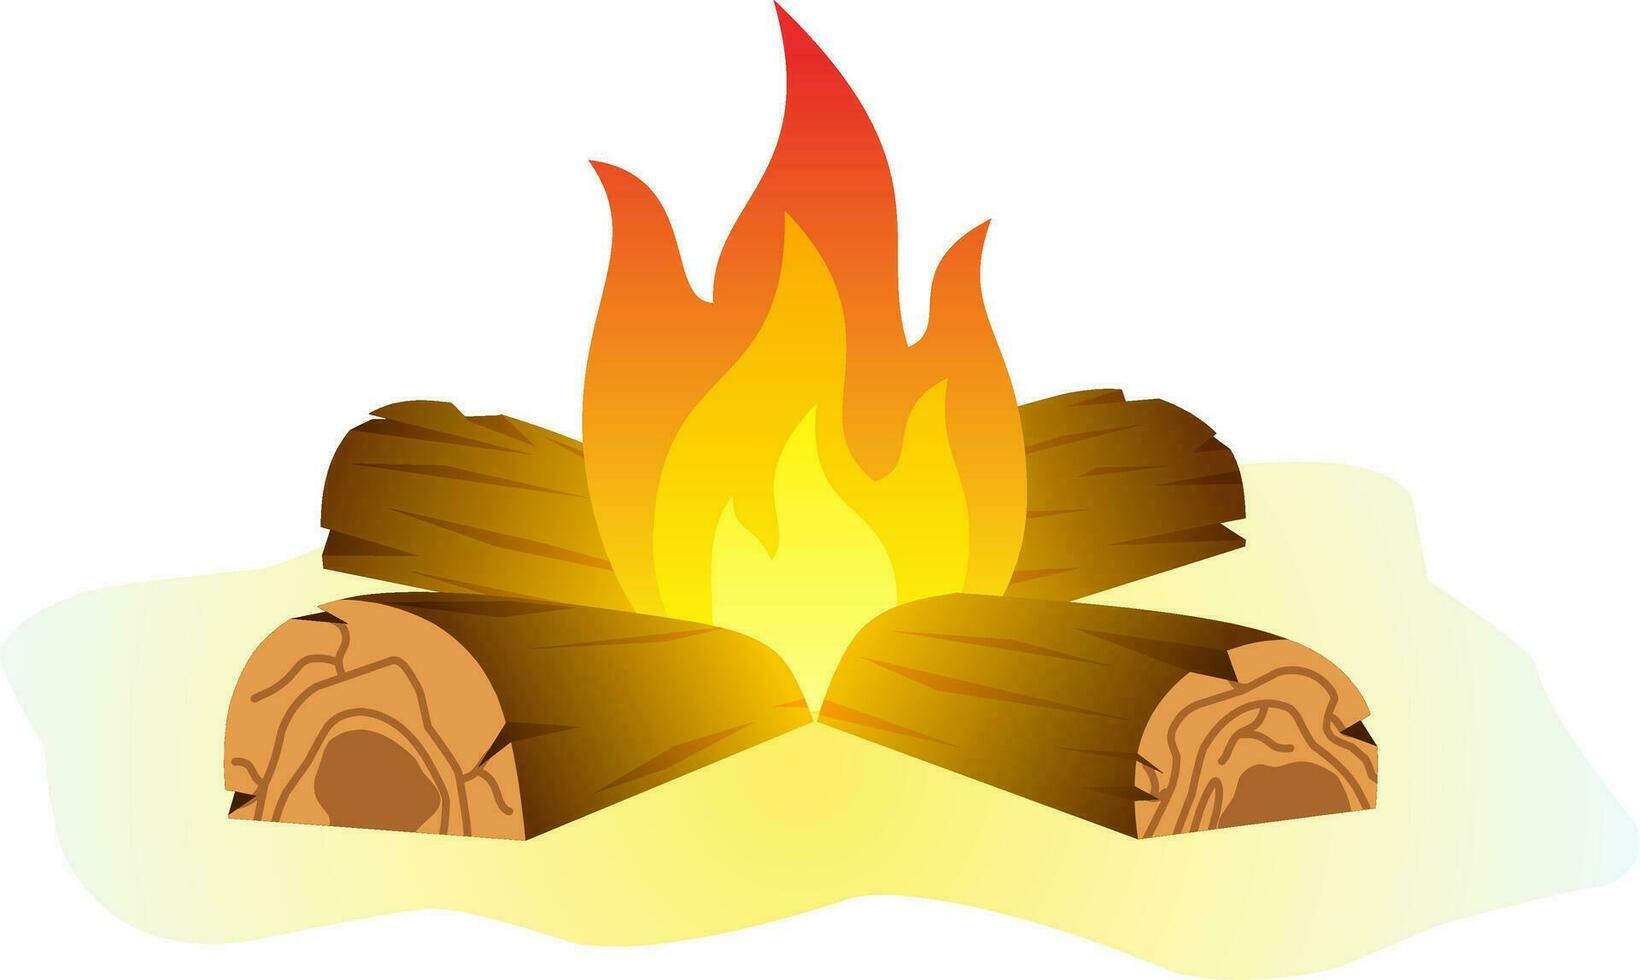 Bonfire icon vector in winter season with gradient color. Bonfire design as an icon, symbol, winter or camping activity. Campfire icon graphic resource for camp illustration design